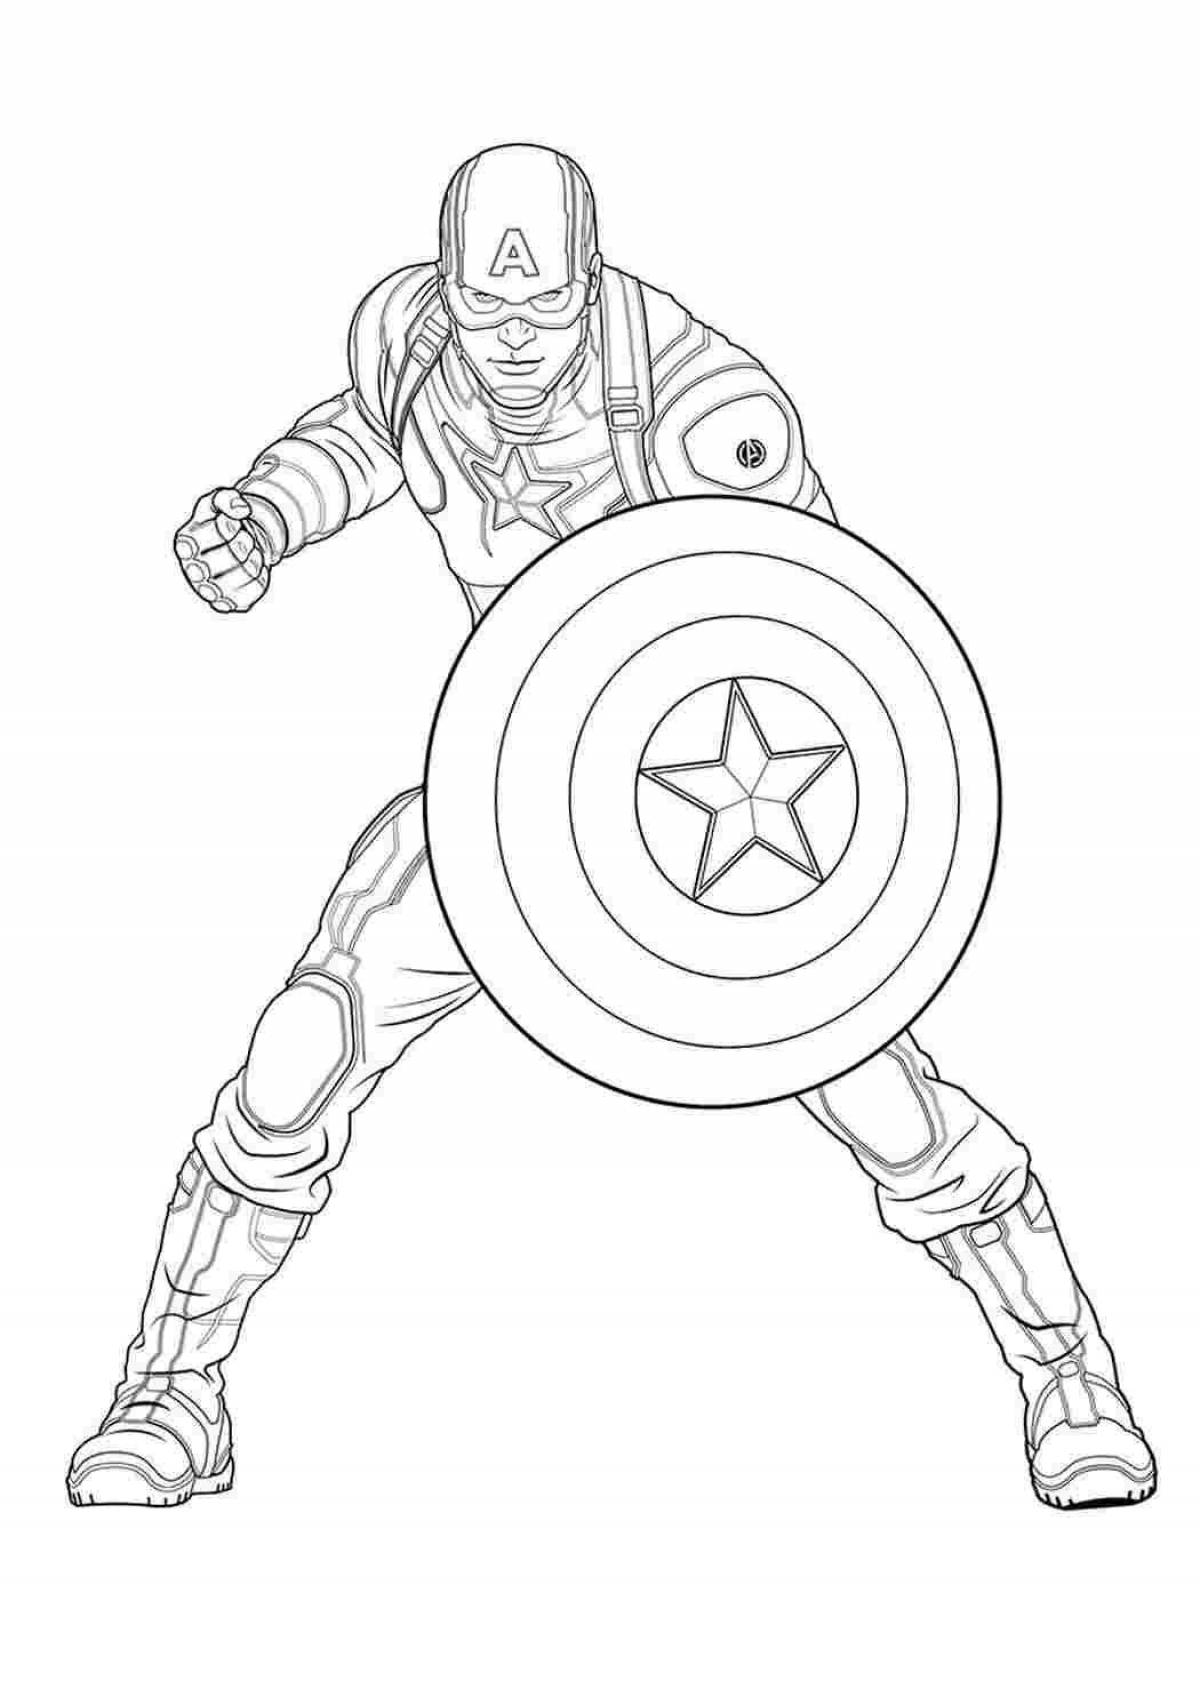 Captain America coloring page for boys